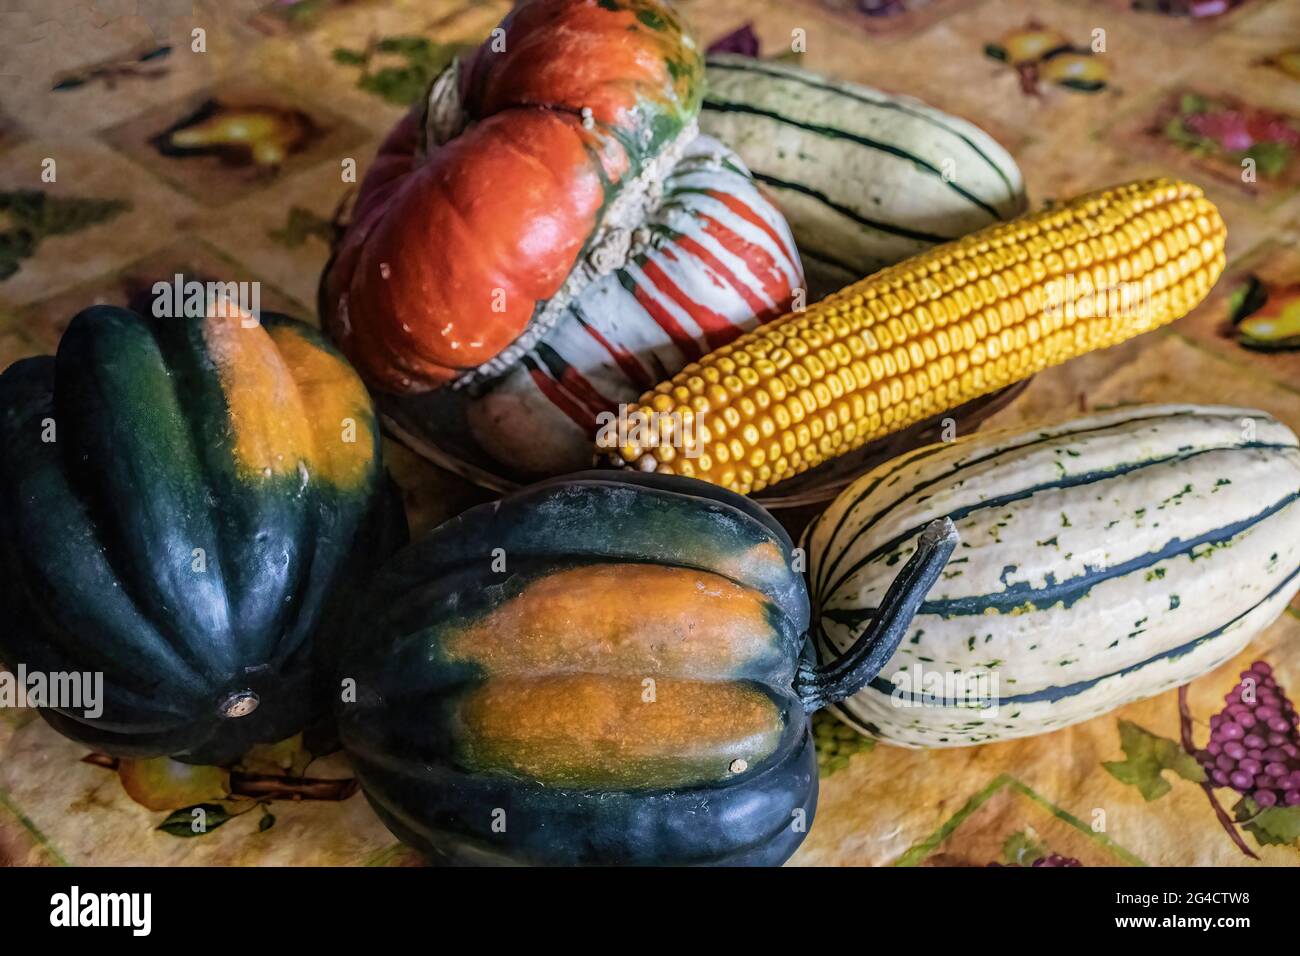 Assortment of squash and an ear of field corn; acorn, turk's turban and delicata. Stock Photo